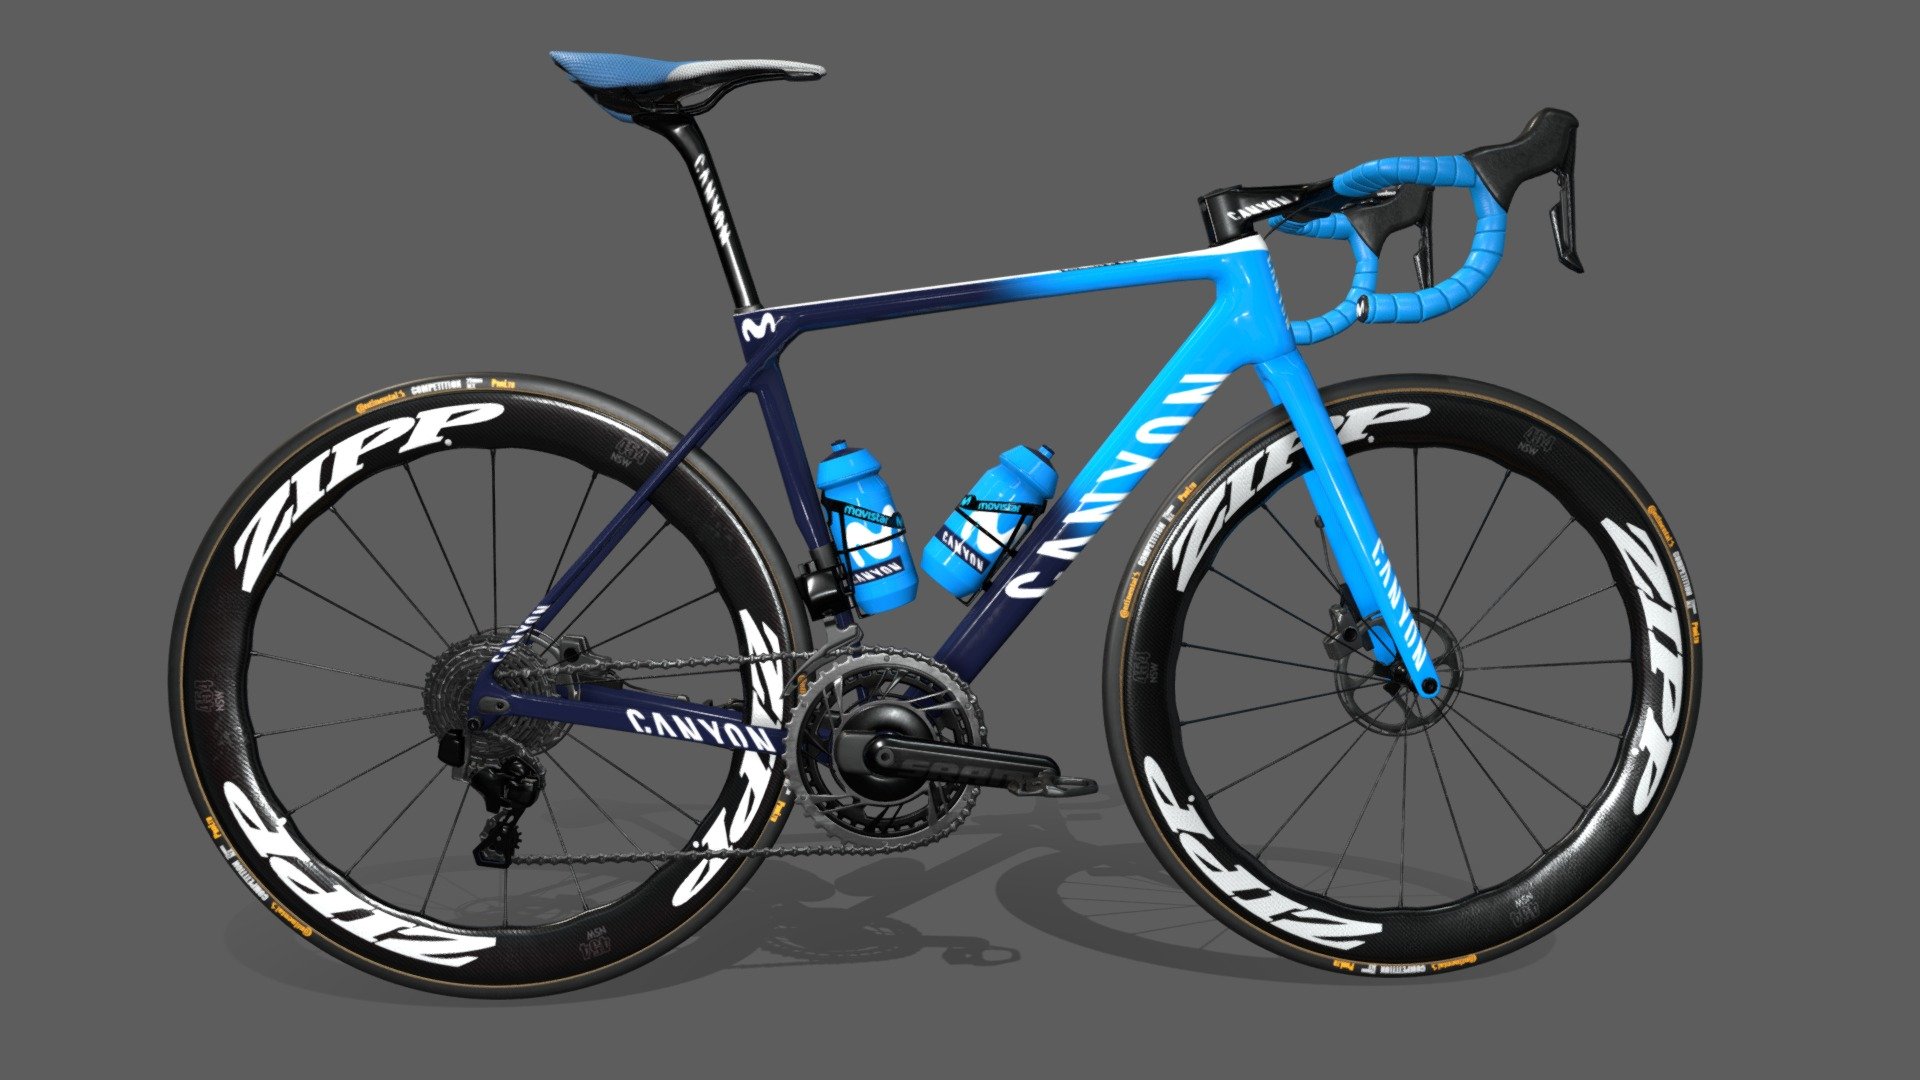 3D model of Canyon Ultimate CF SLX of Movistar Procycling Team
3D model made in 3ds max, UV in RIZOMUV, textured in Substance painter and photoshop.
Rendered in Marmoset Toolbag. Also in Vray, Arnold, Met-Roughness and for sketchfab 3d model